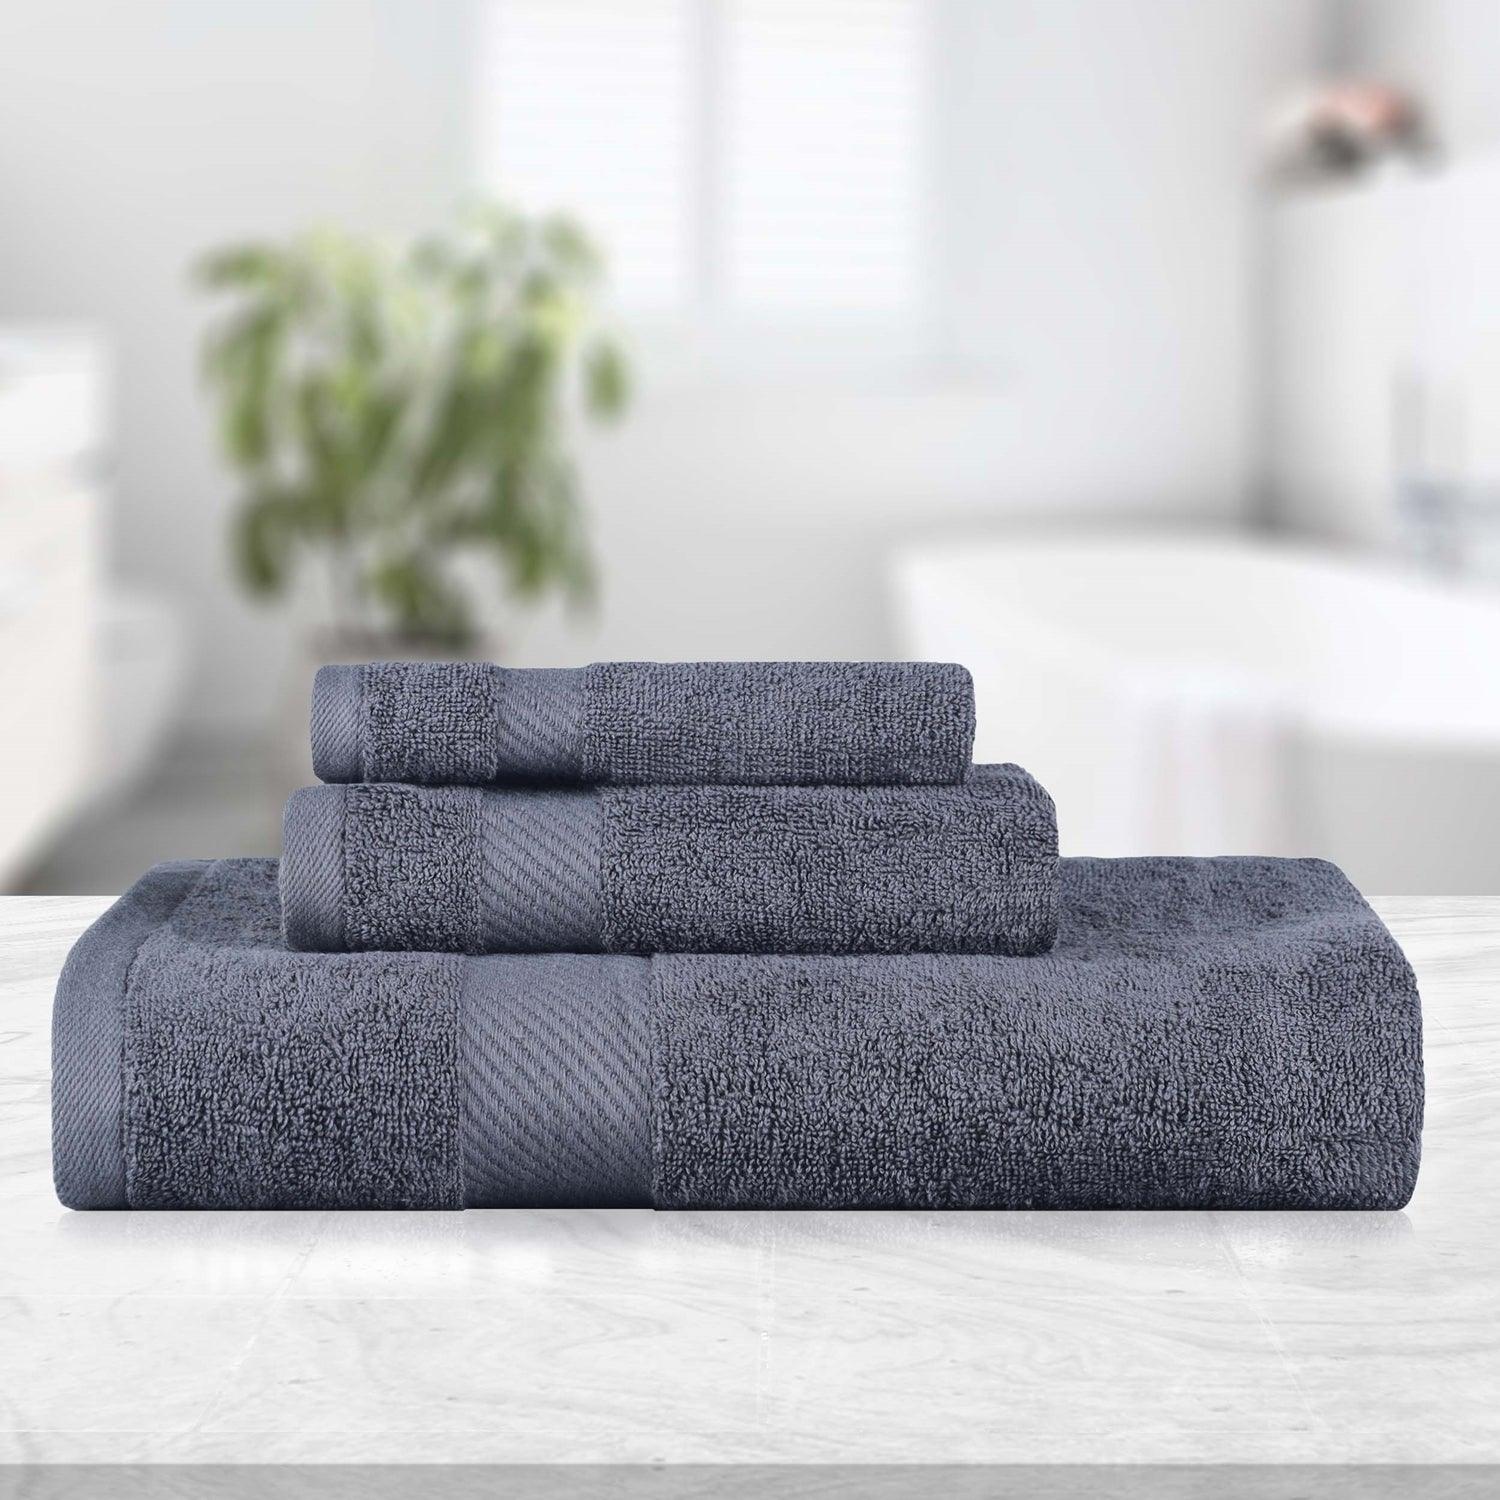 Kendell Egyptian Cotton Quick Drying 3-Piece Towel Set - Smoked Pearl